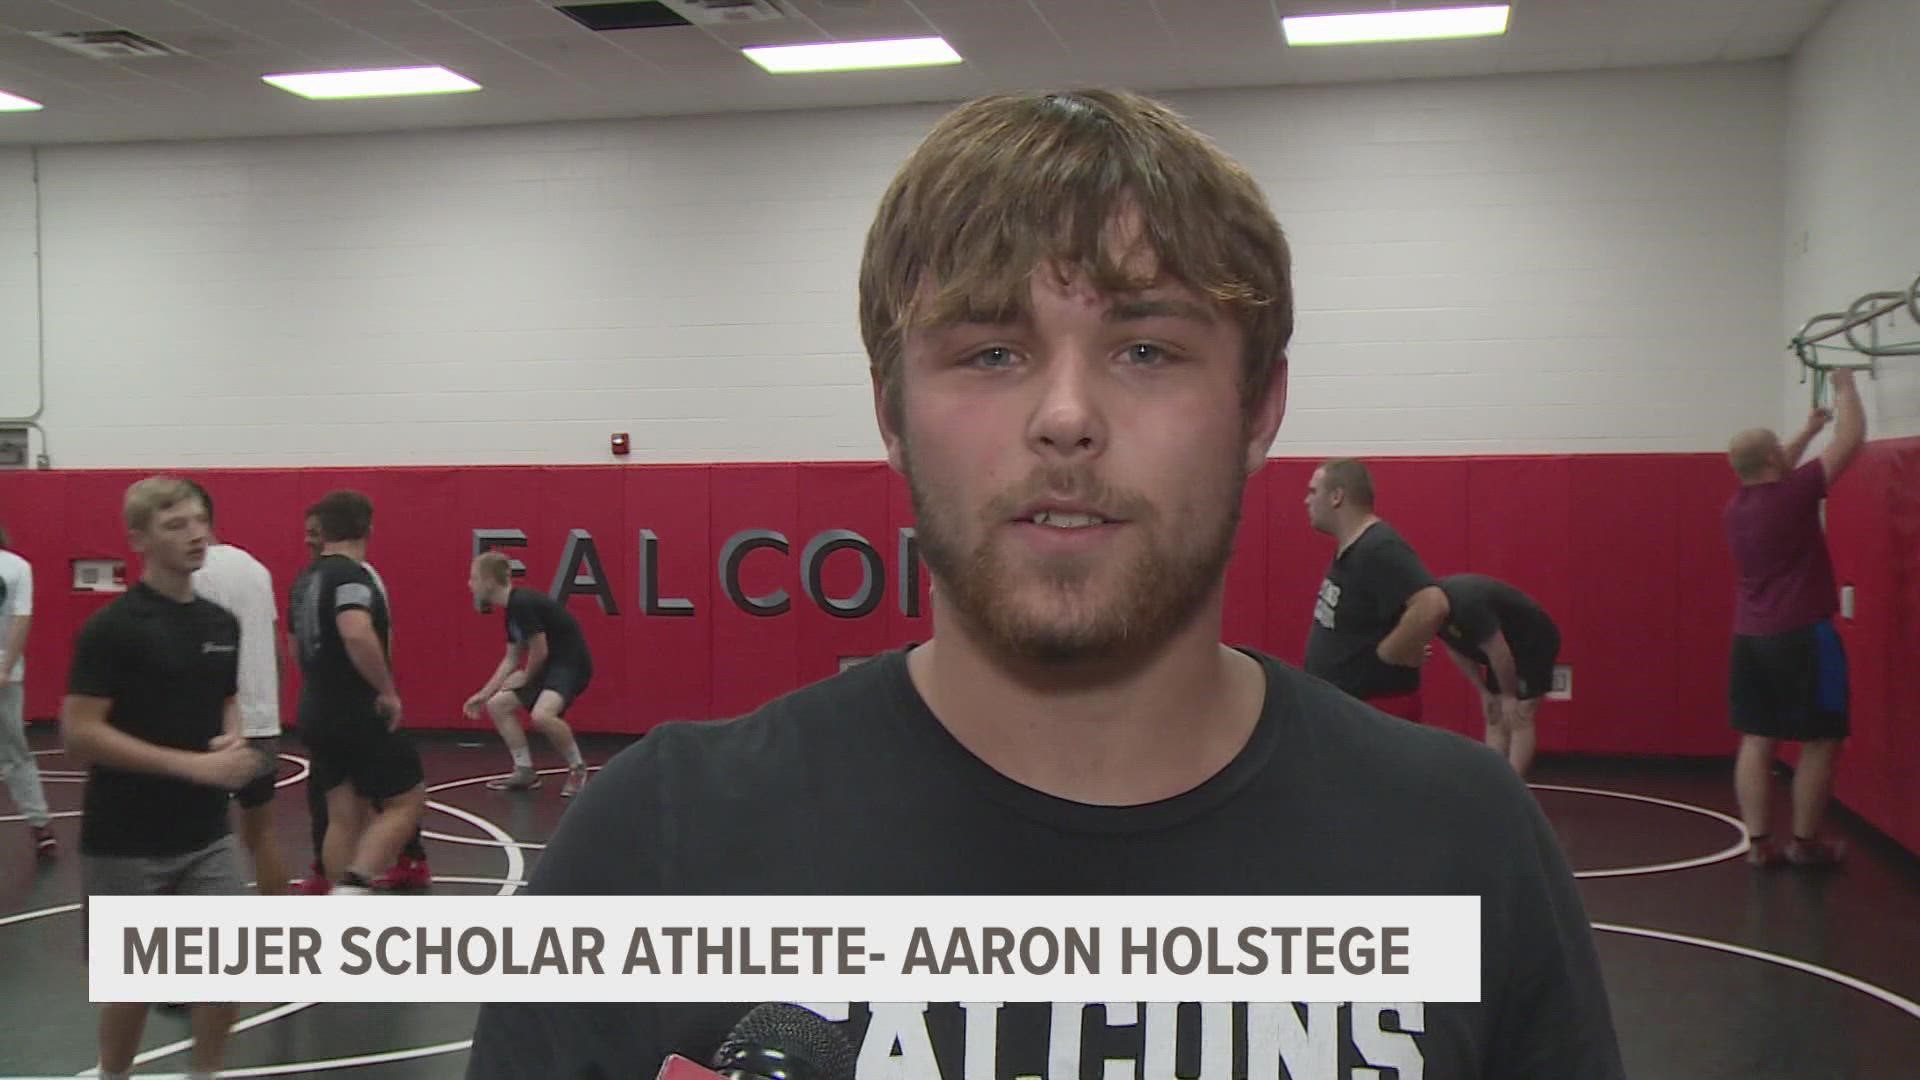 Allendale High School senior Aaron Holstege stands out among his peers.